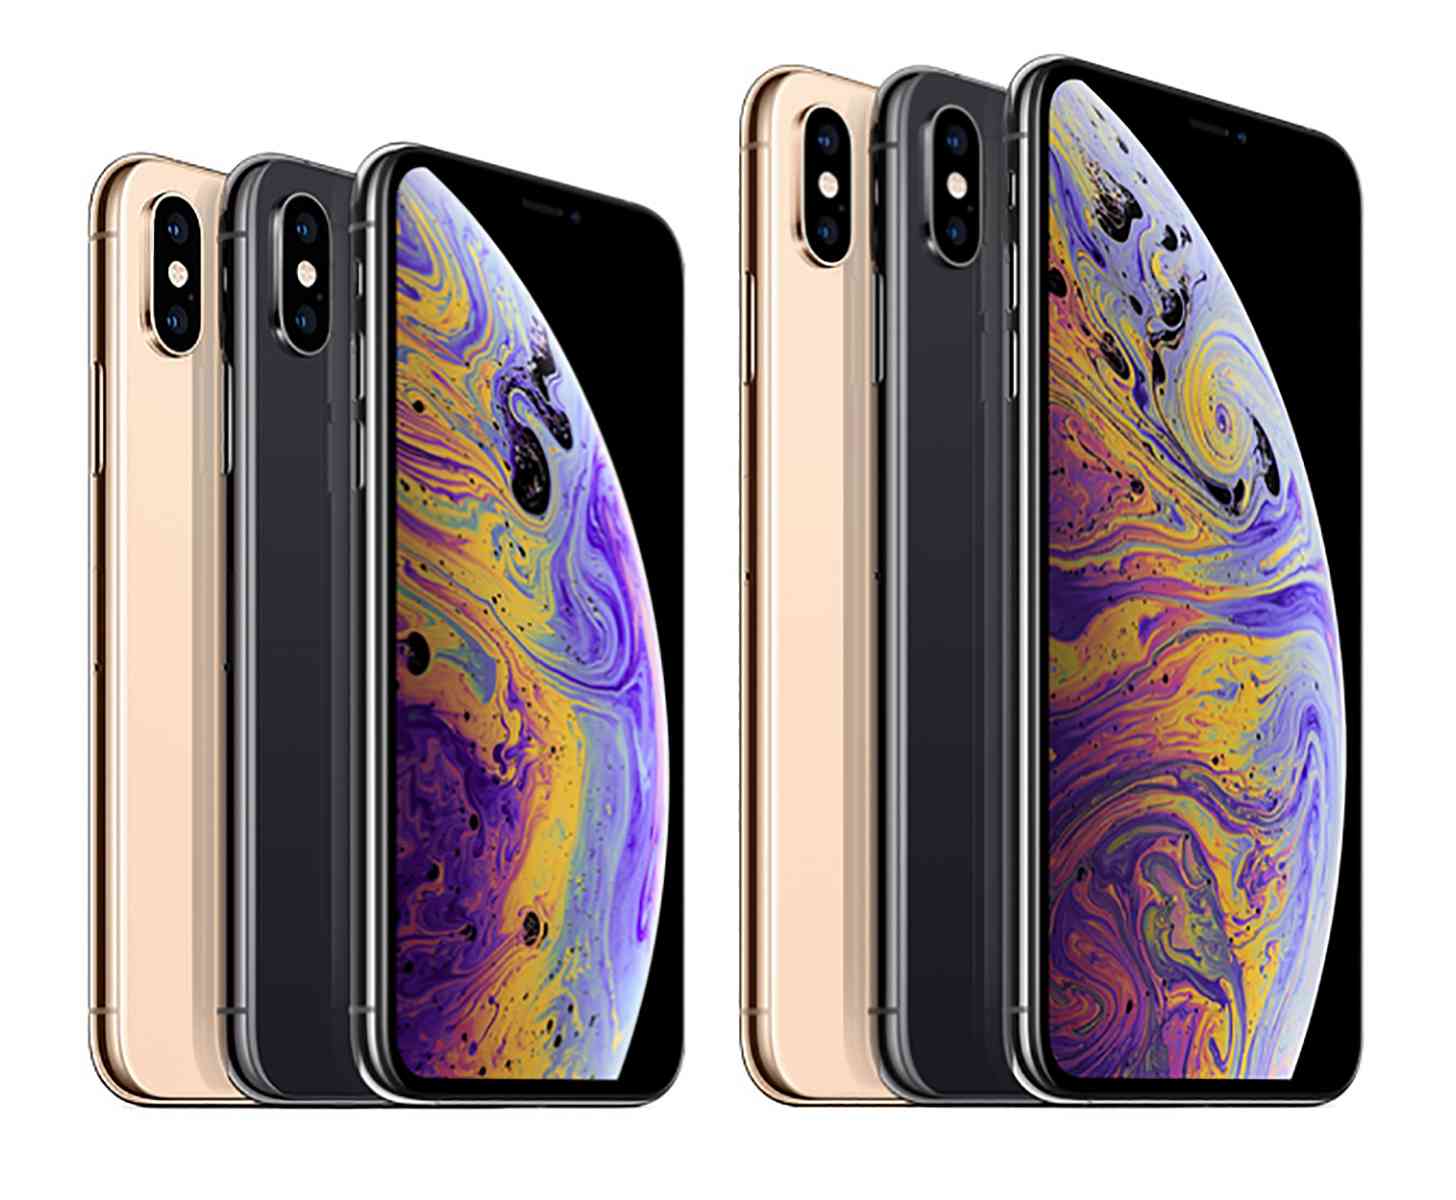 iPhone Xs, iPhone Xs Max colors